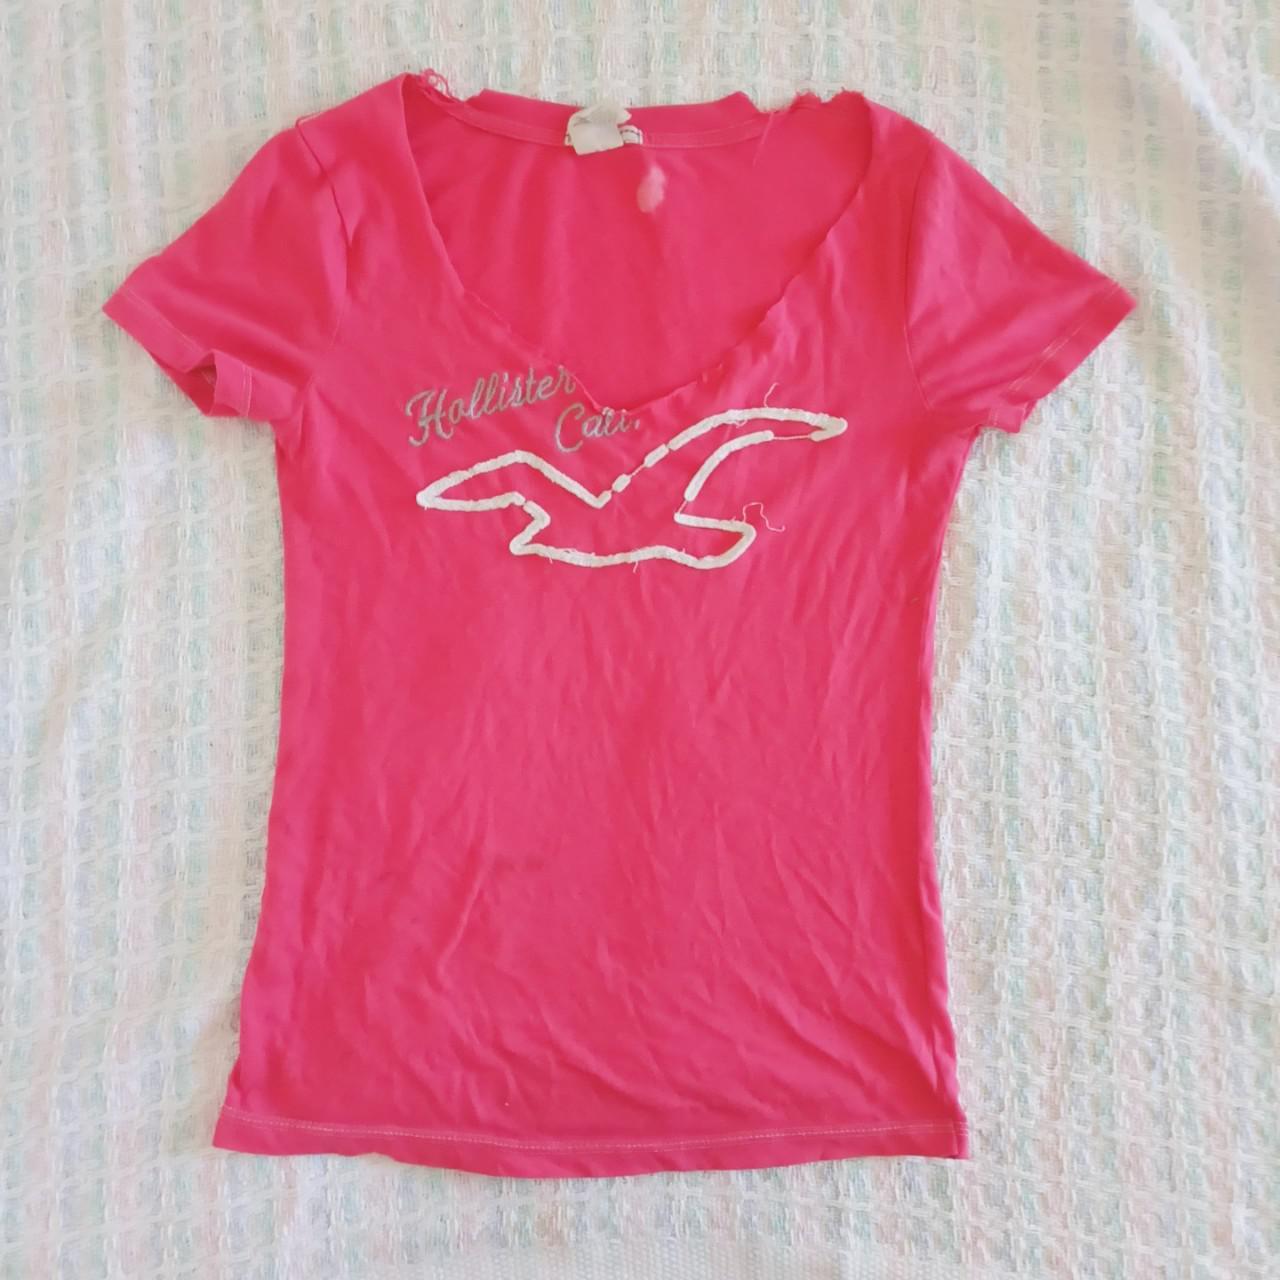 Product Image 1 - Red-ish pink Hollister Tee in